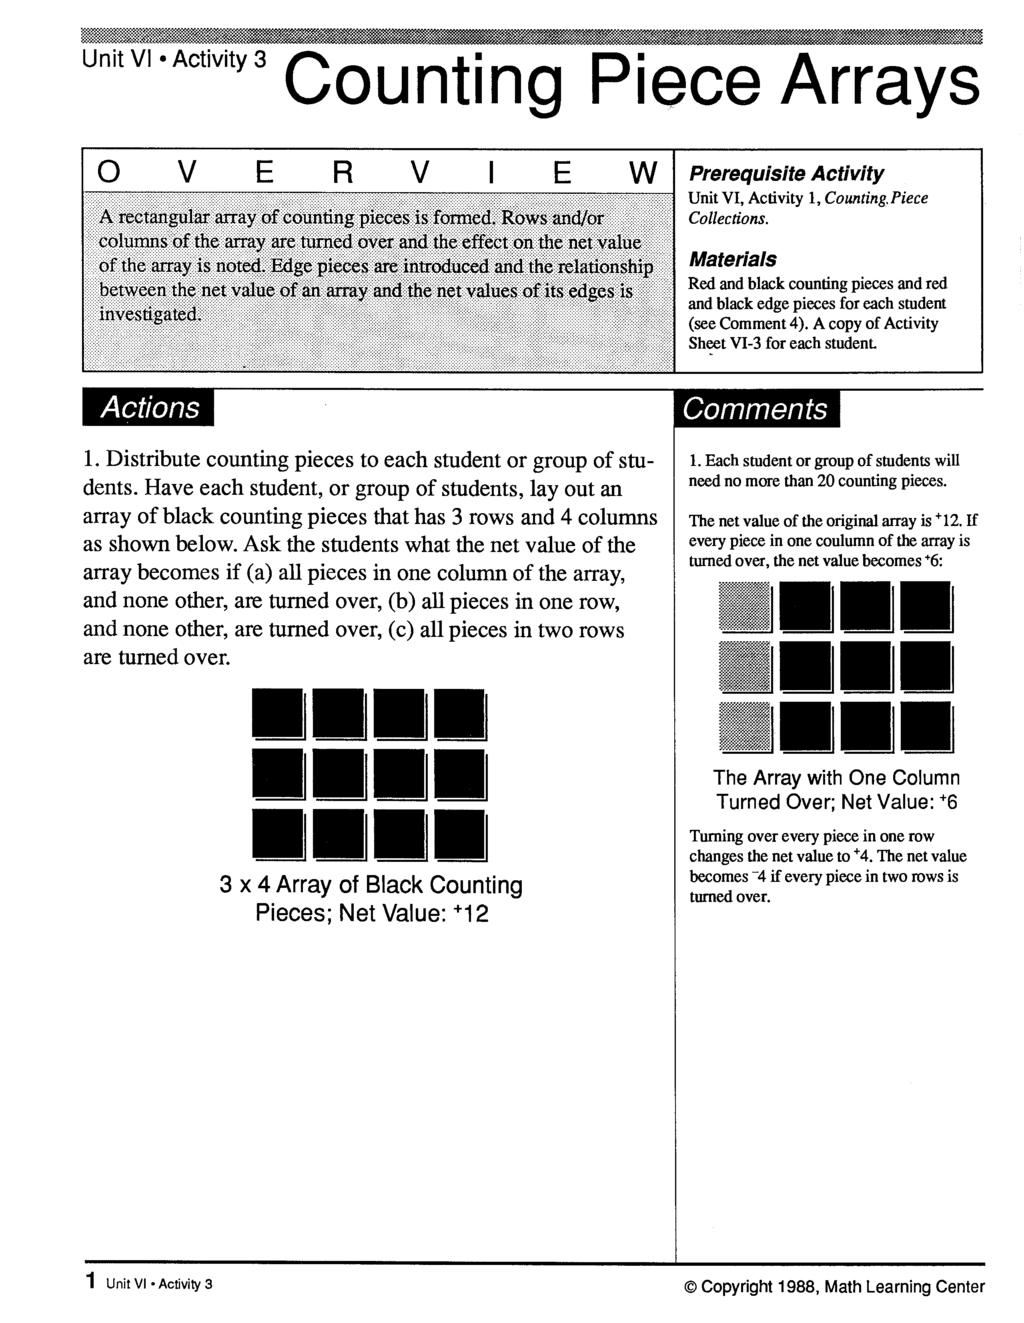 Unit VI Activity 3 Counting Piece Arrays 0 v E R v E Materials Red and black counting pieces and red and black edge pieces for each student (see Comment 4 ).